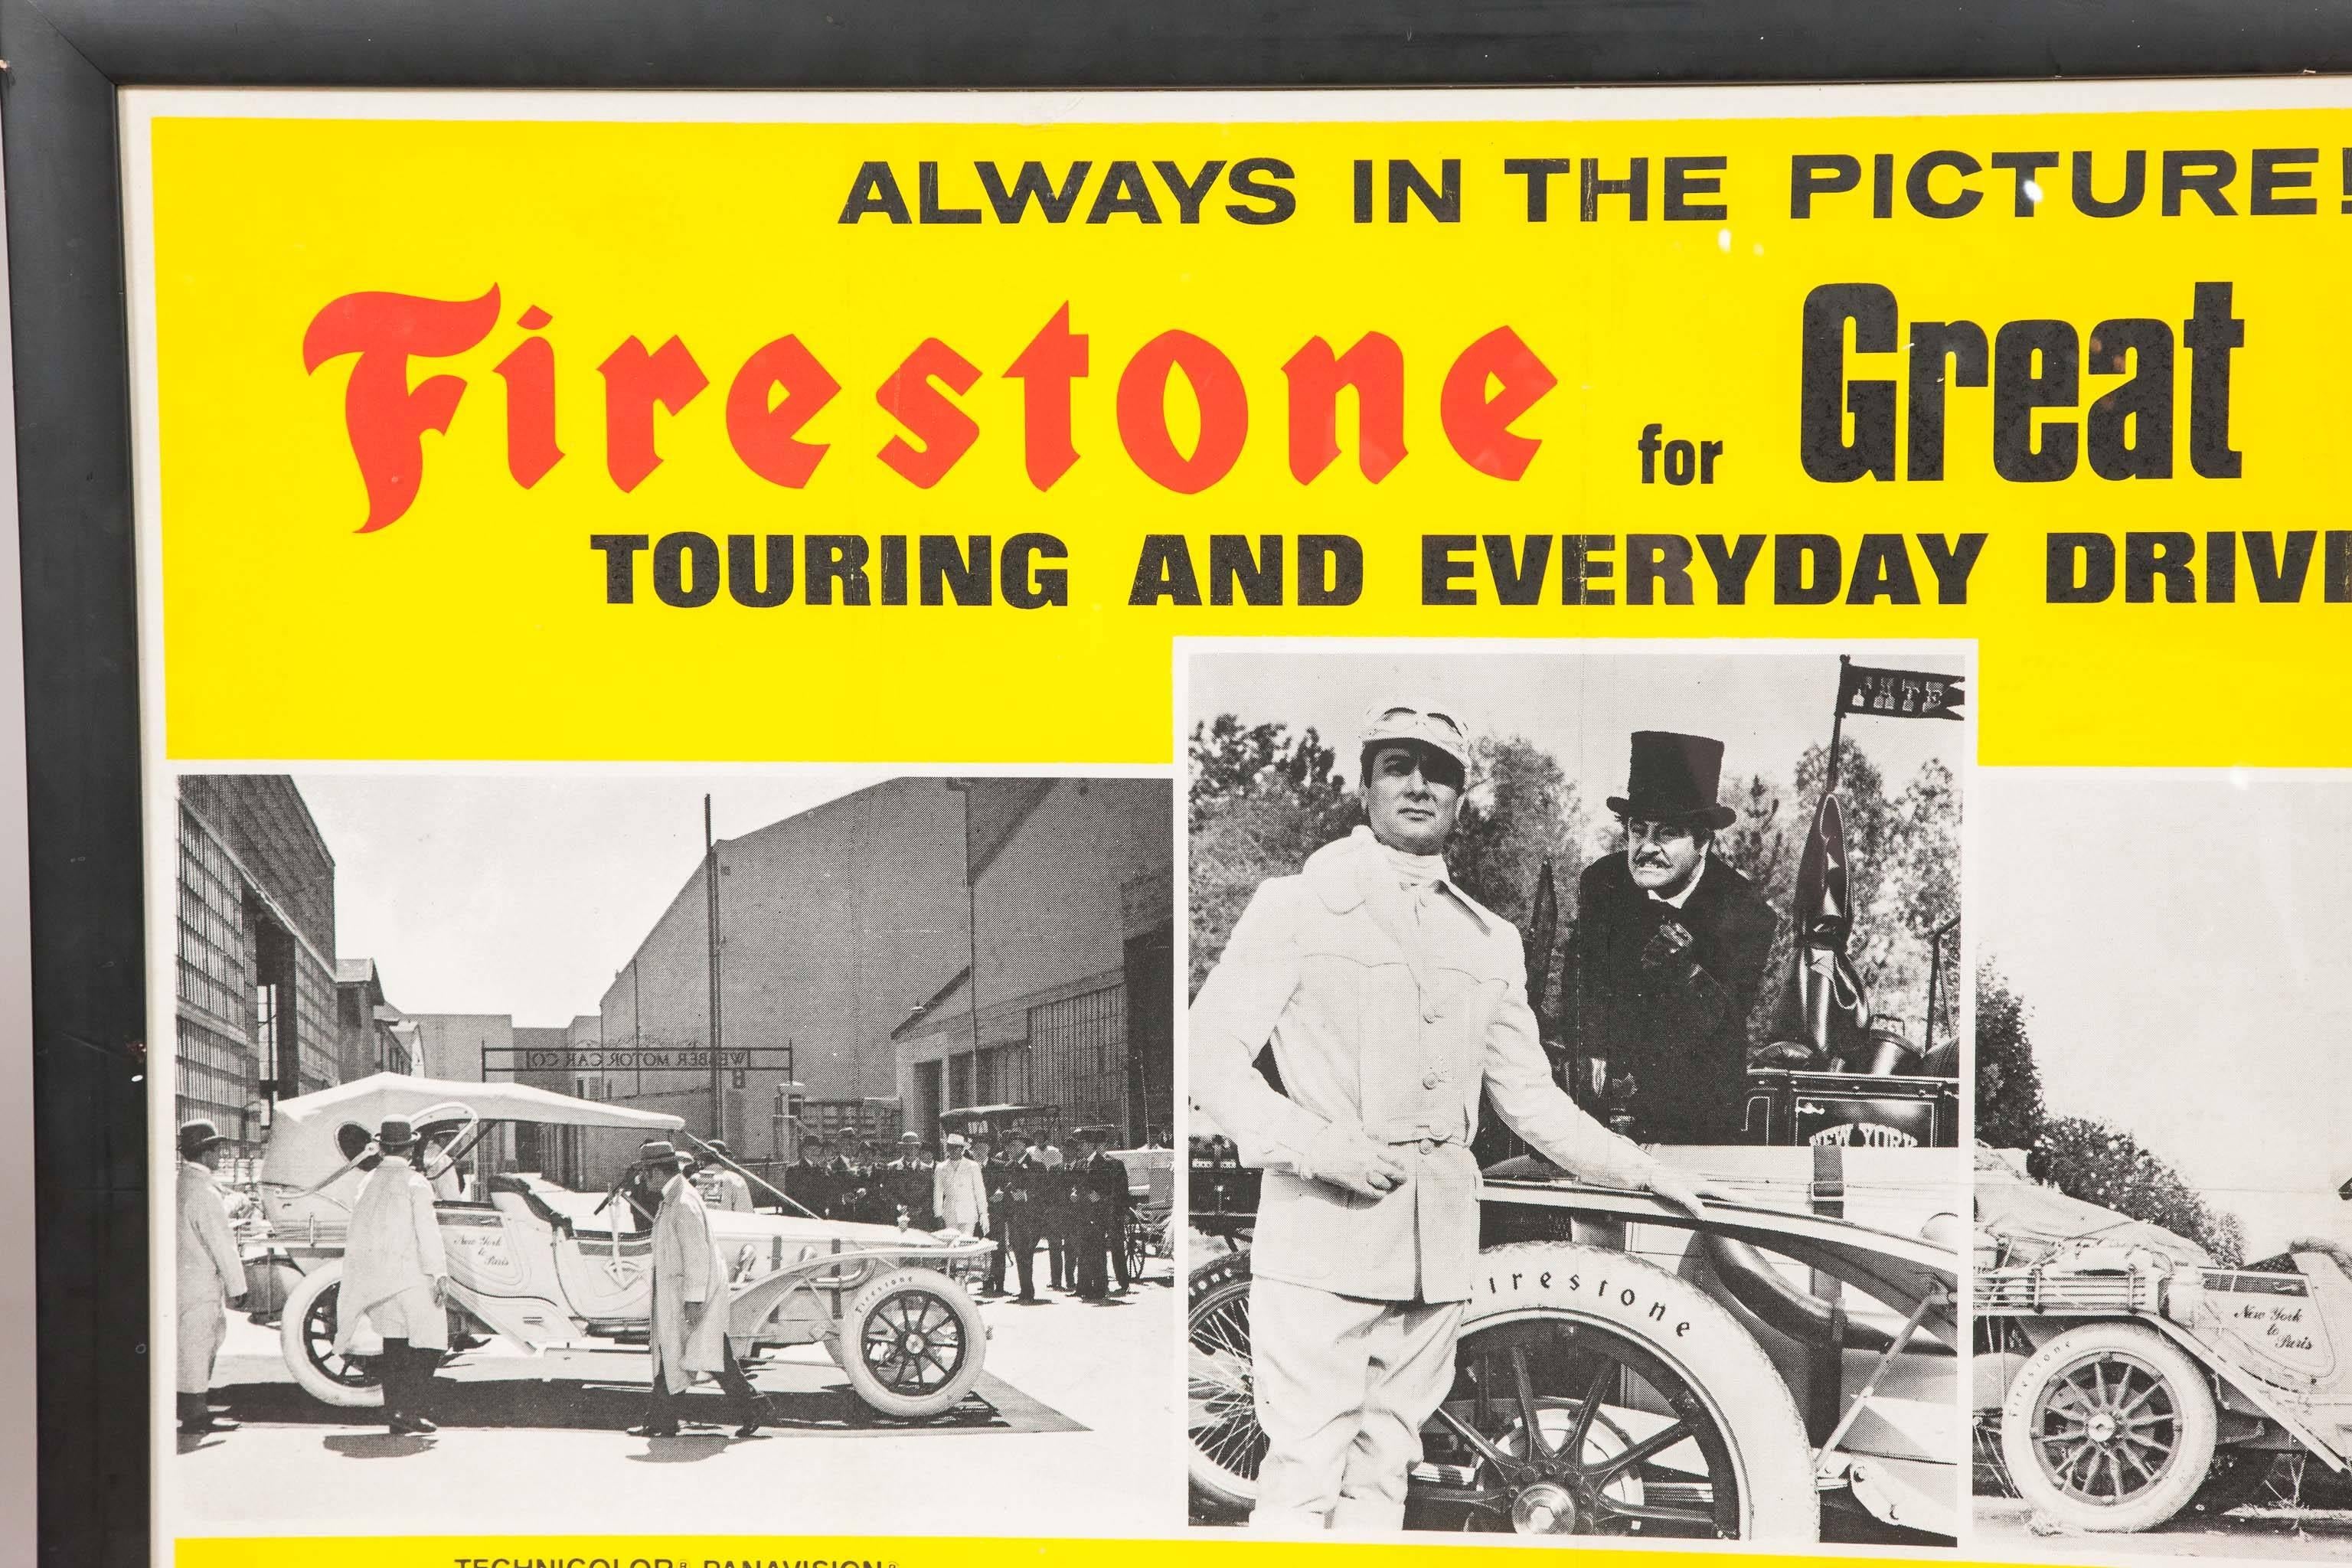 The poster for firestone and the Warner Bros. 1965 slapstick comedy film The Great Race.

The film stared Jack Lemmon, Tony Curtis, and Natalie Wood, it was directed by Blake Edwards and music by Henry Mancini.

    